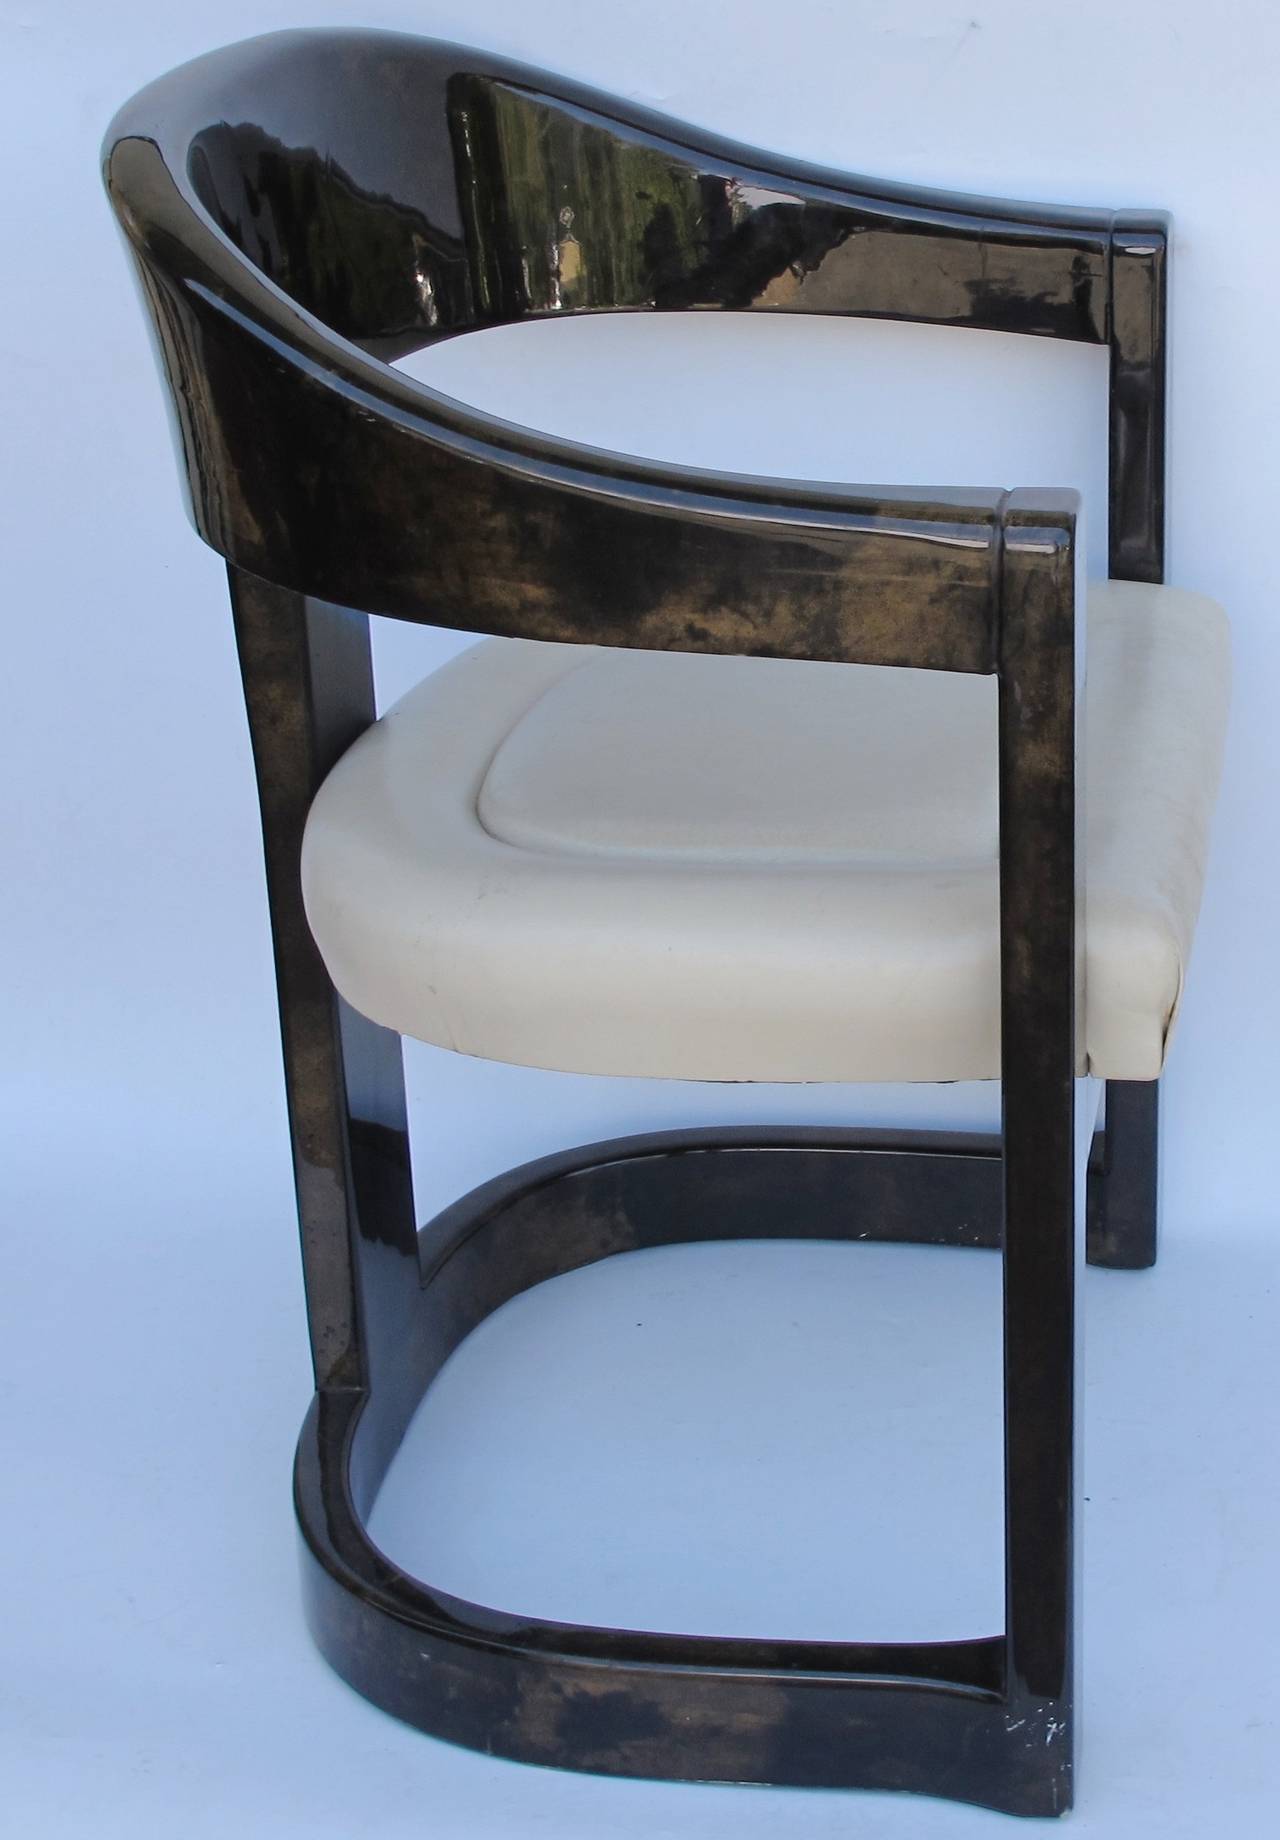 Set of four goatskin lacquered chairs by Karl Springer. His iconic "Onassis" Chairs. This incredible set was custom-made along with a dining table and console for the home of Tennis legend Bjorn Borg in the early 1980s. They have the